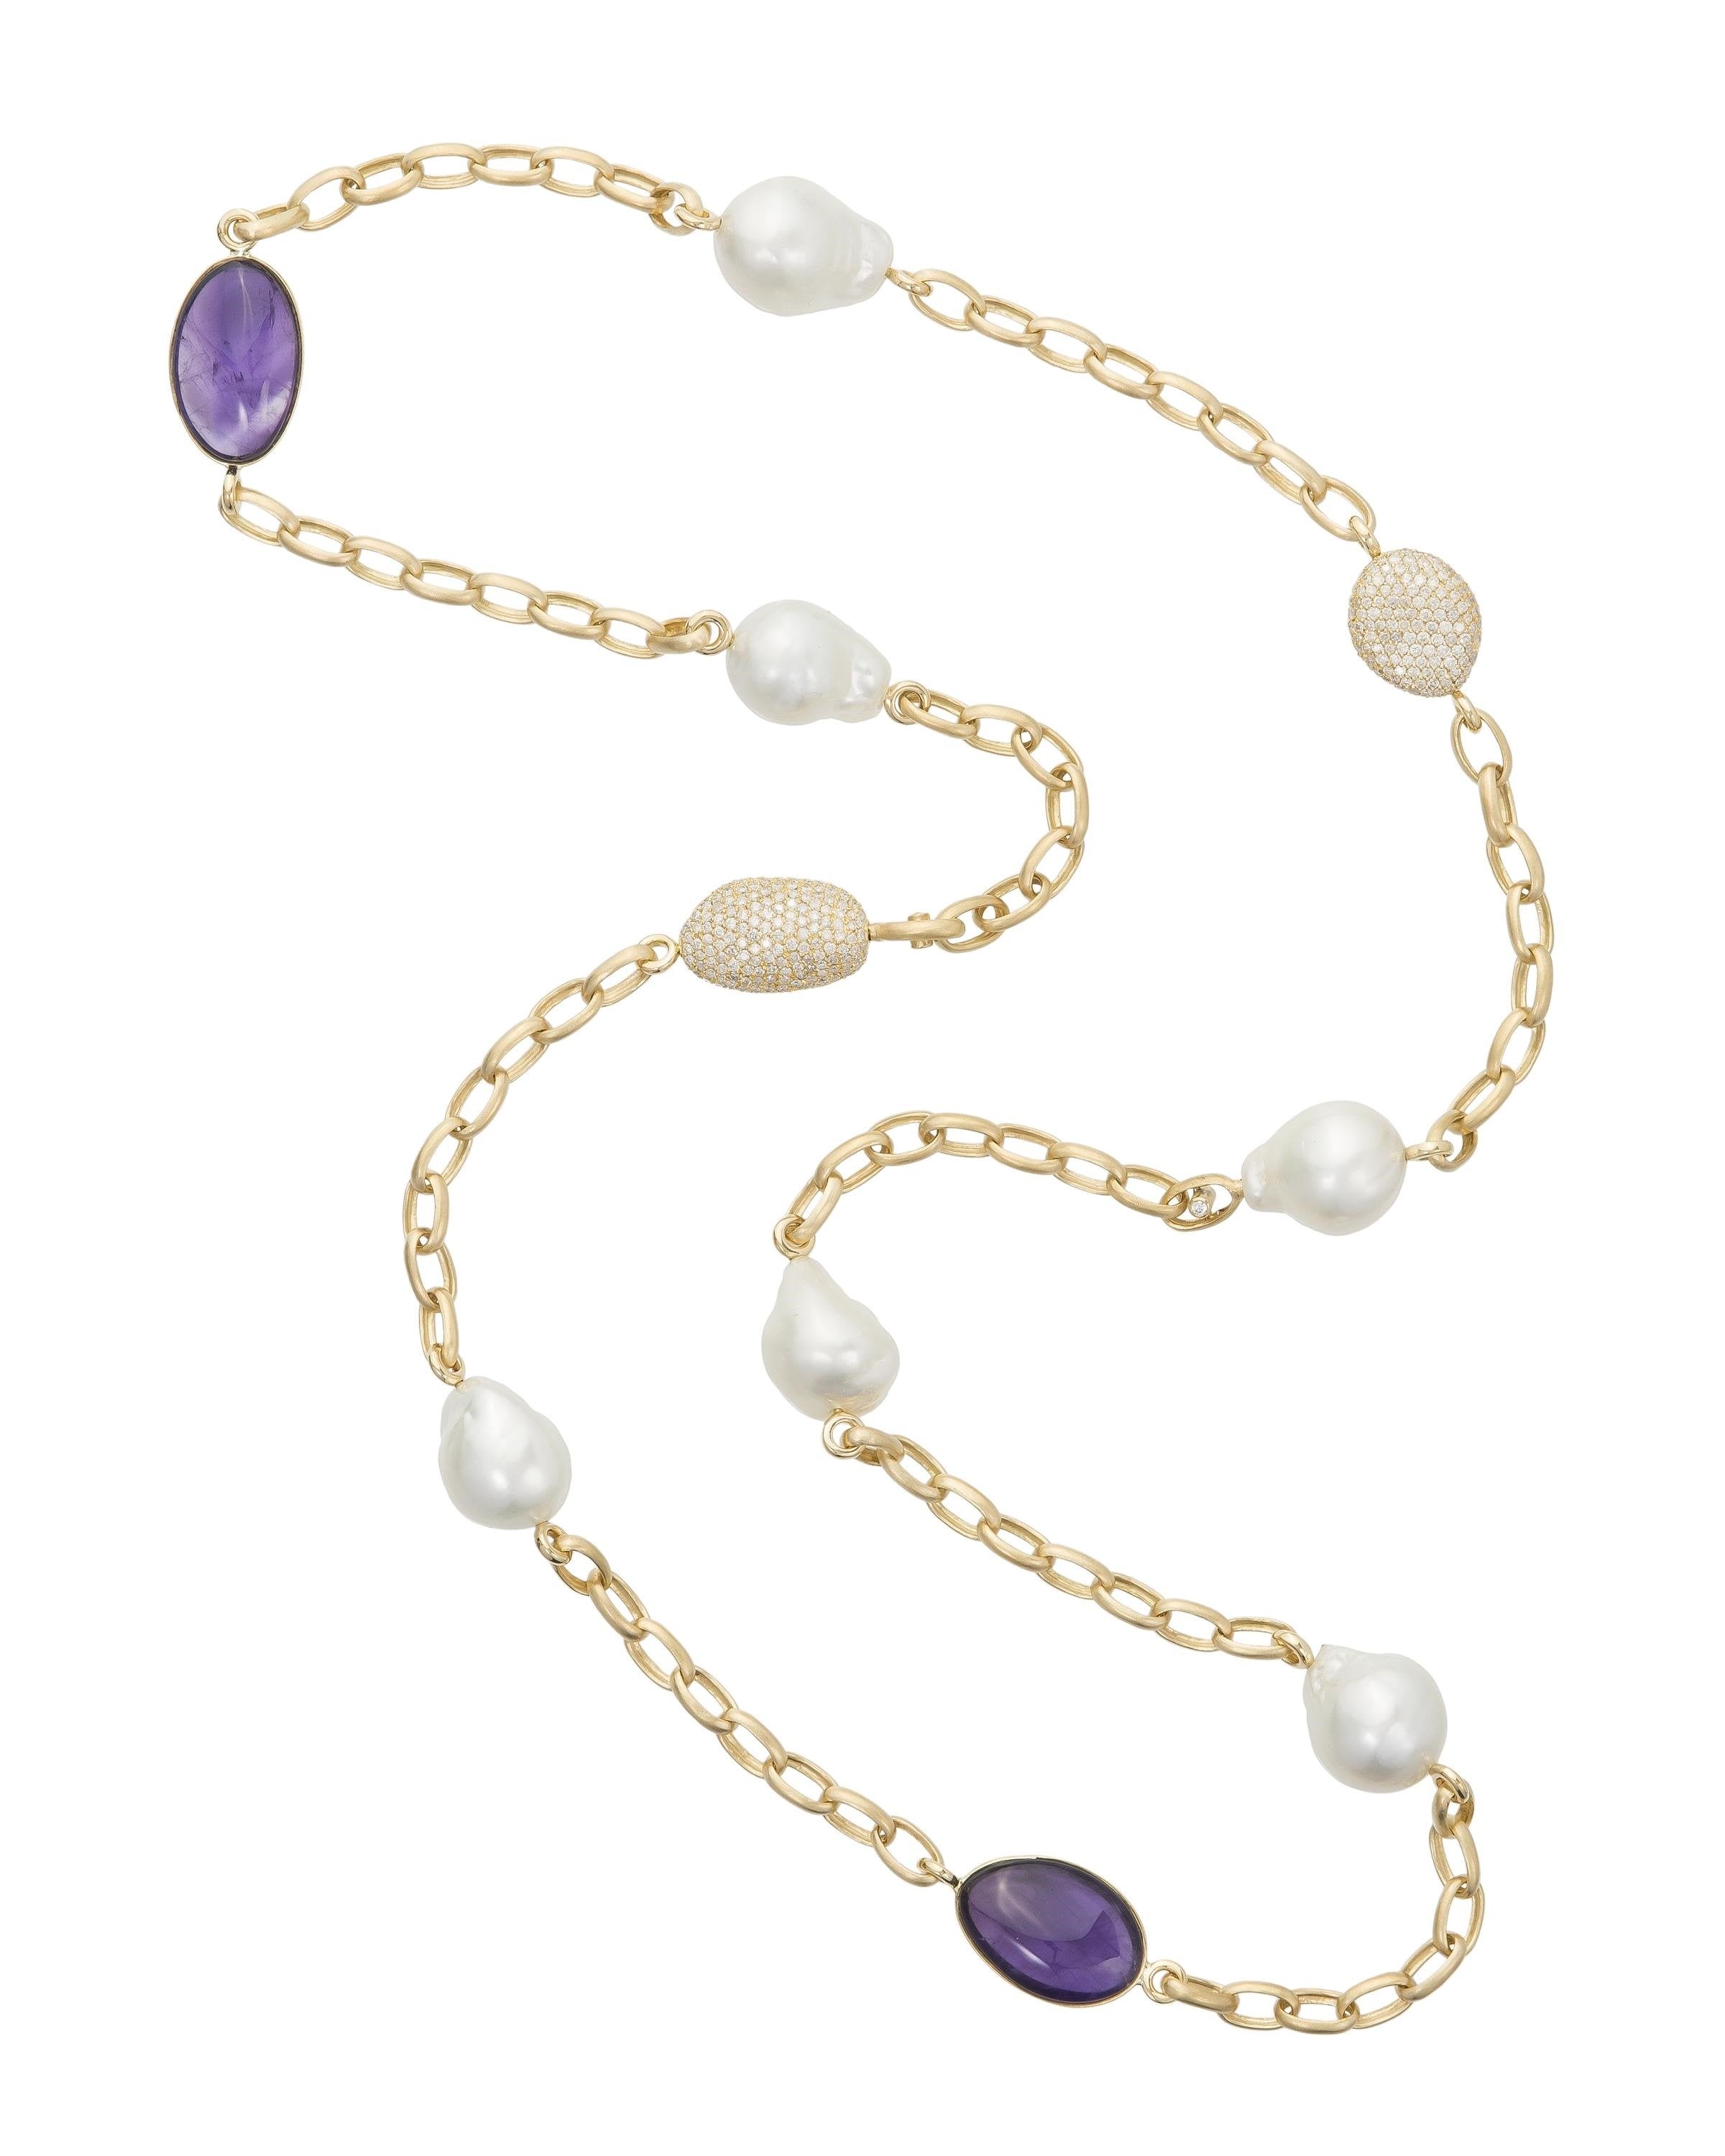 South Sea pearl, diamond and amethyst necklace featuring Australian baroque South Sea pearls, amethyst 'pebbles' and diamond 'pebbles' set with diamonds, crafted in 18 karat yellow gold.